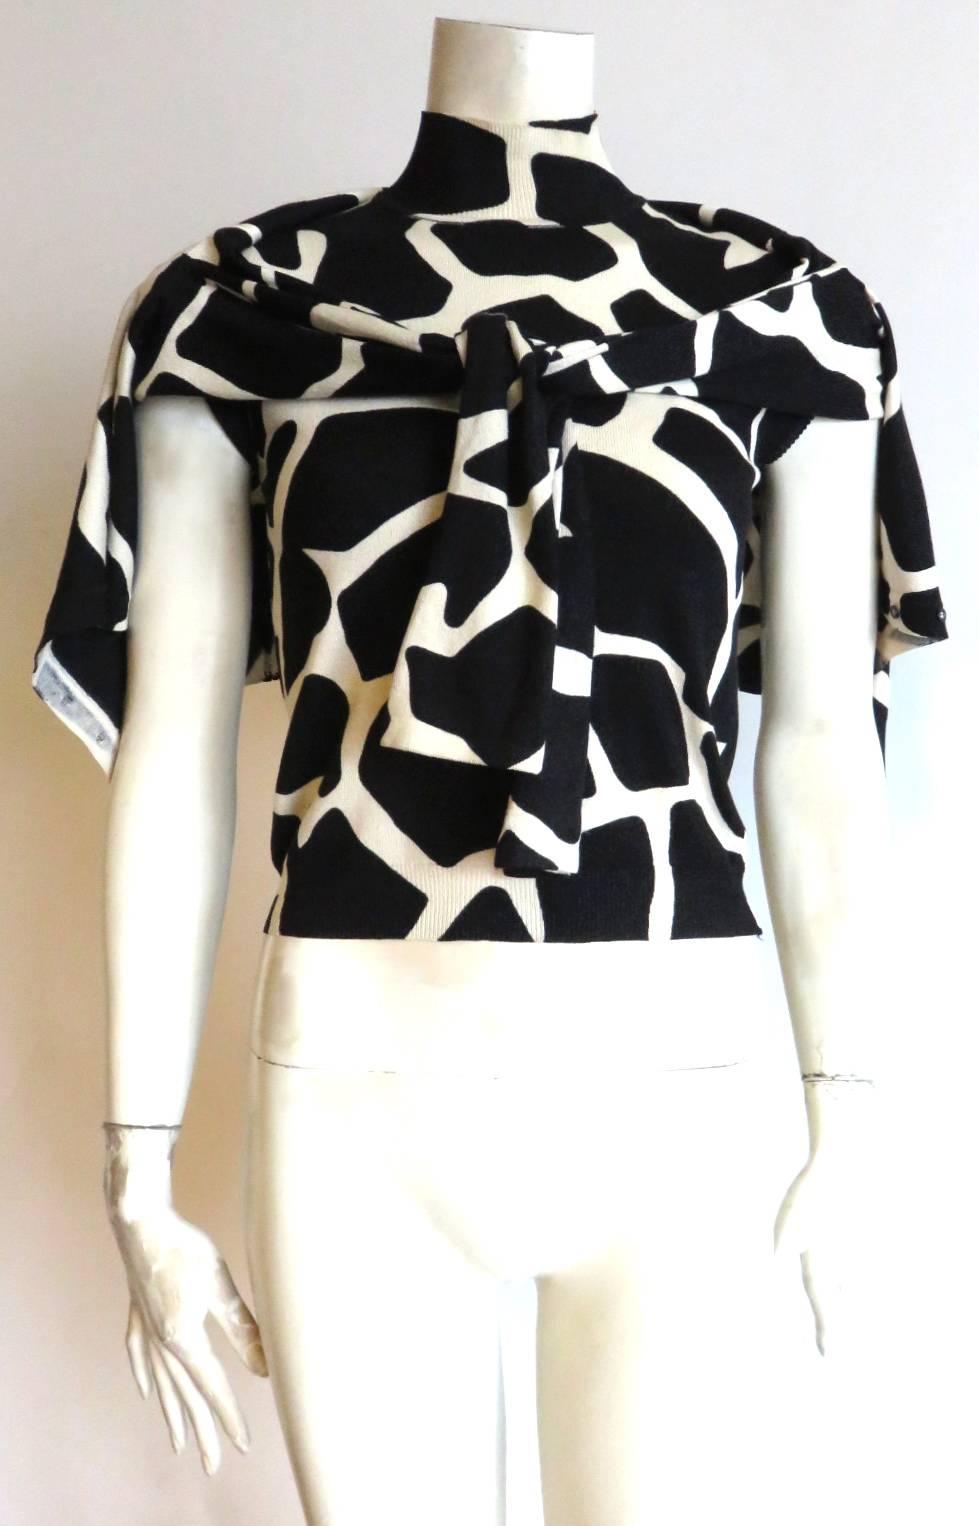 Excellent condition, 1990's, JOHN GALLIANO PARIS Giraffe print silk sweater twinset.

Two-piece, cardigan, and sweater top set with mini, smoked pearl button closures.  

Cardigan neckline, and top armholes feature pinked-edge